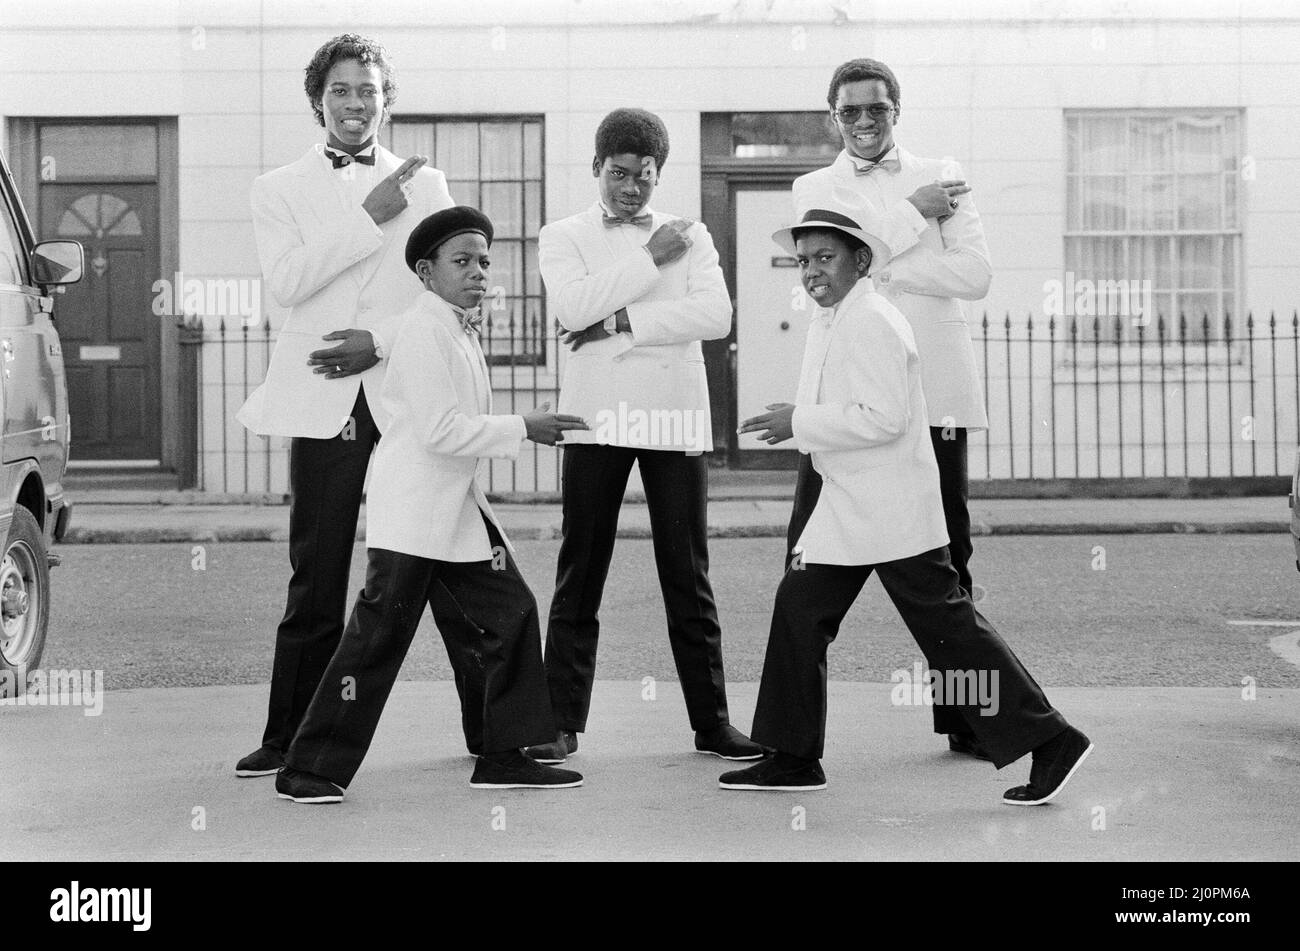 Musical Youth, British Jamaican pop / reggae group, who are currently recording the video for their lastest single titled '007', pictured 10th October 1983.  Members of the group are: Freddie Waite a.k.a. Junior, Dennis Seaton, Patrick Waite, Michael Grant & Kelvin Grant *** Local Caption *** Freddie Waite Junior Joir Dennis Seaton Patrick Waite Michael Grant Kelvin Grant Stock Photo